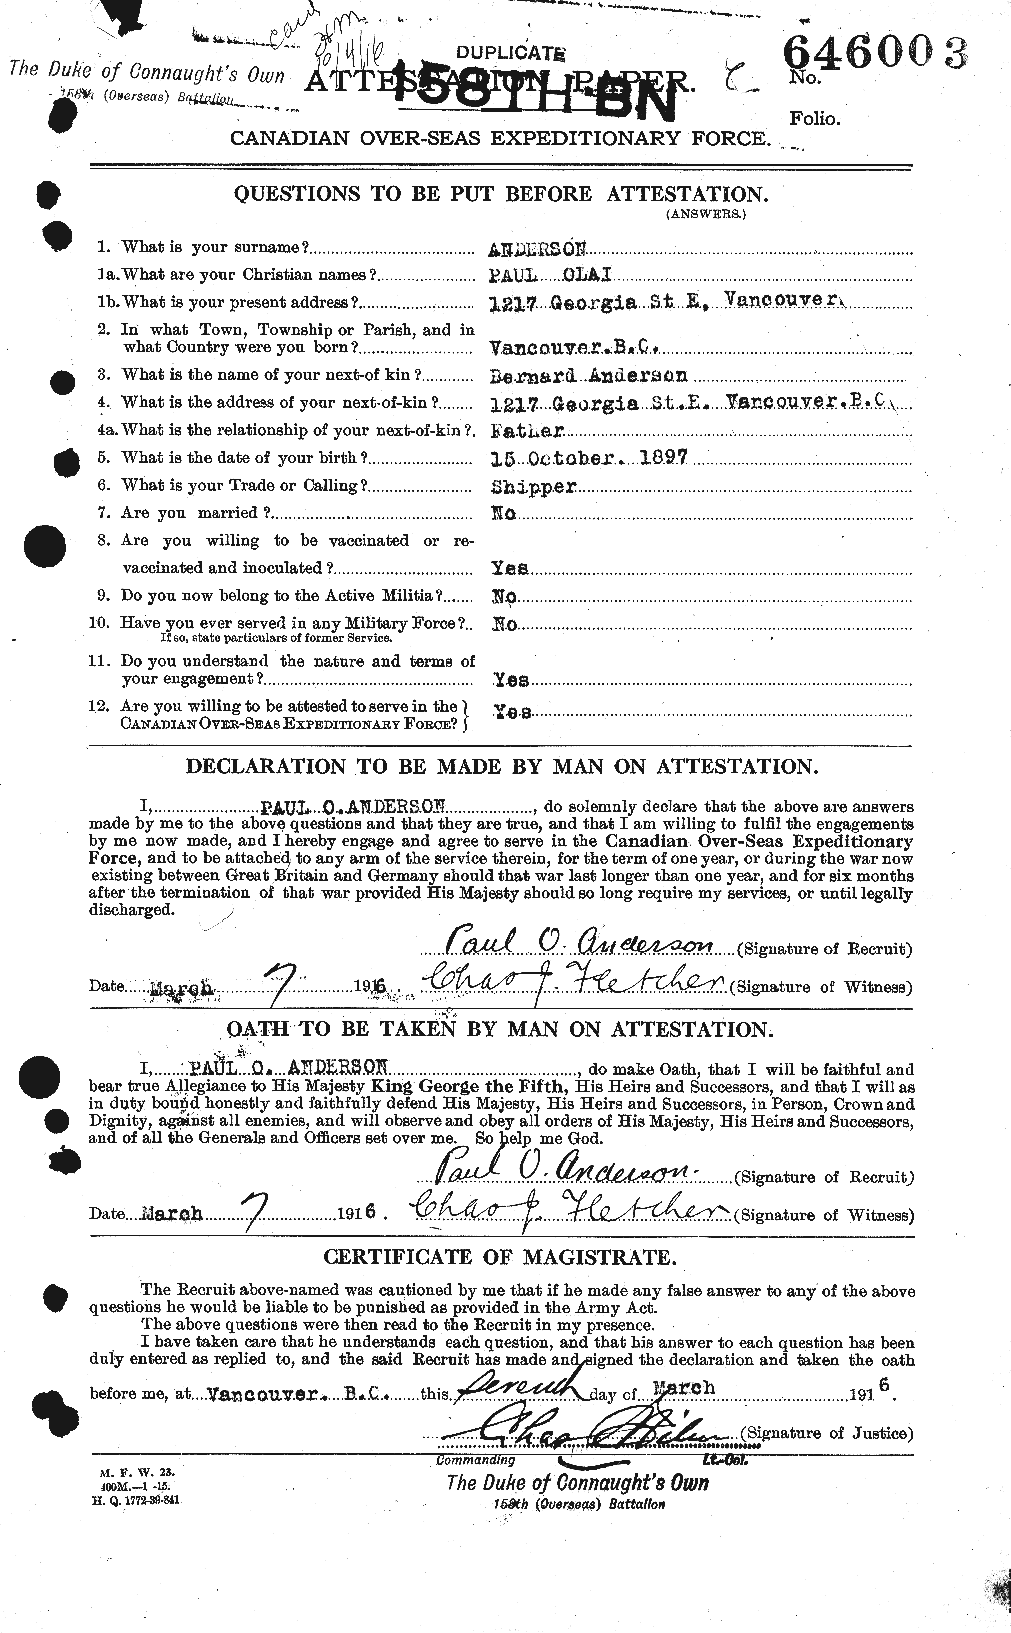 Personnel Records of the First World War - CEF 207364a